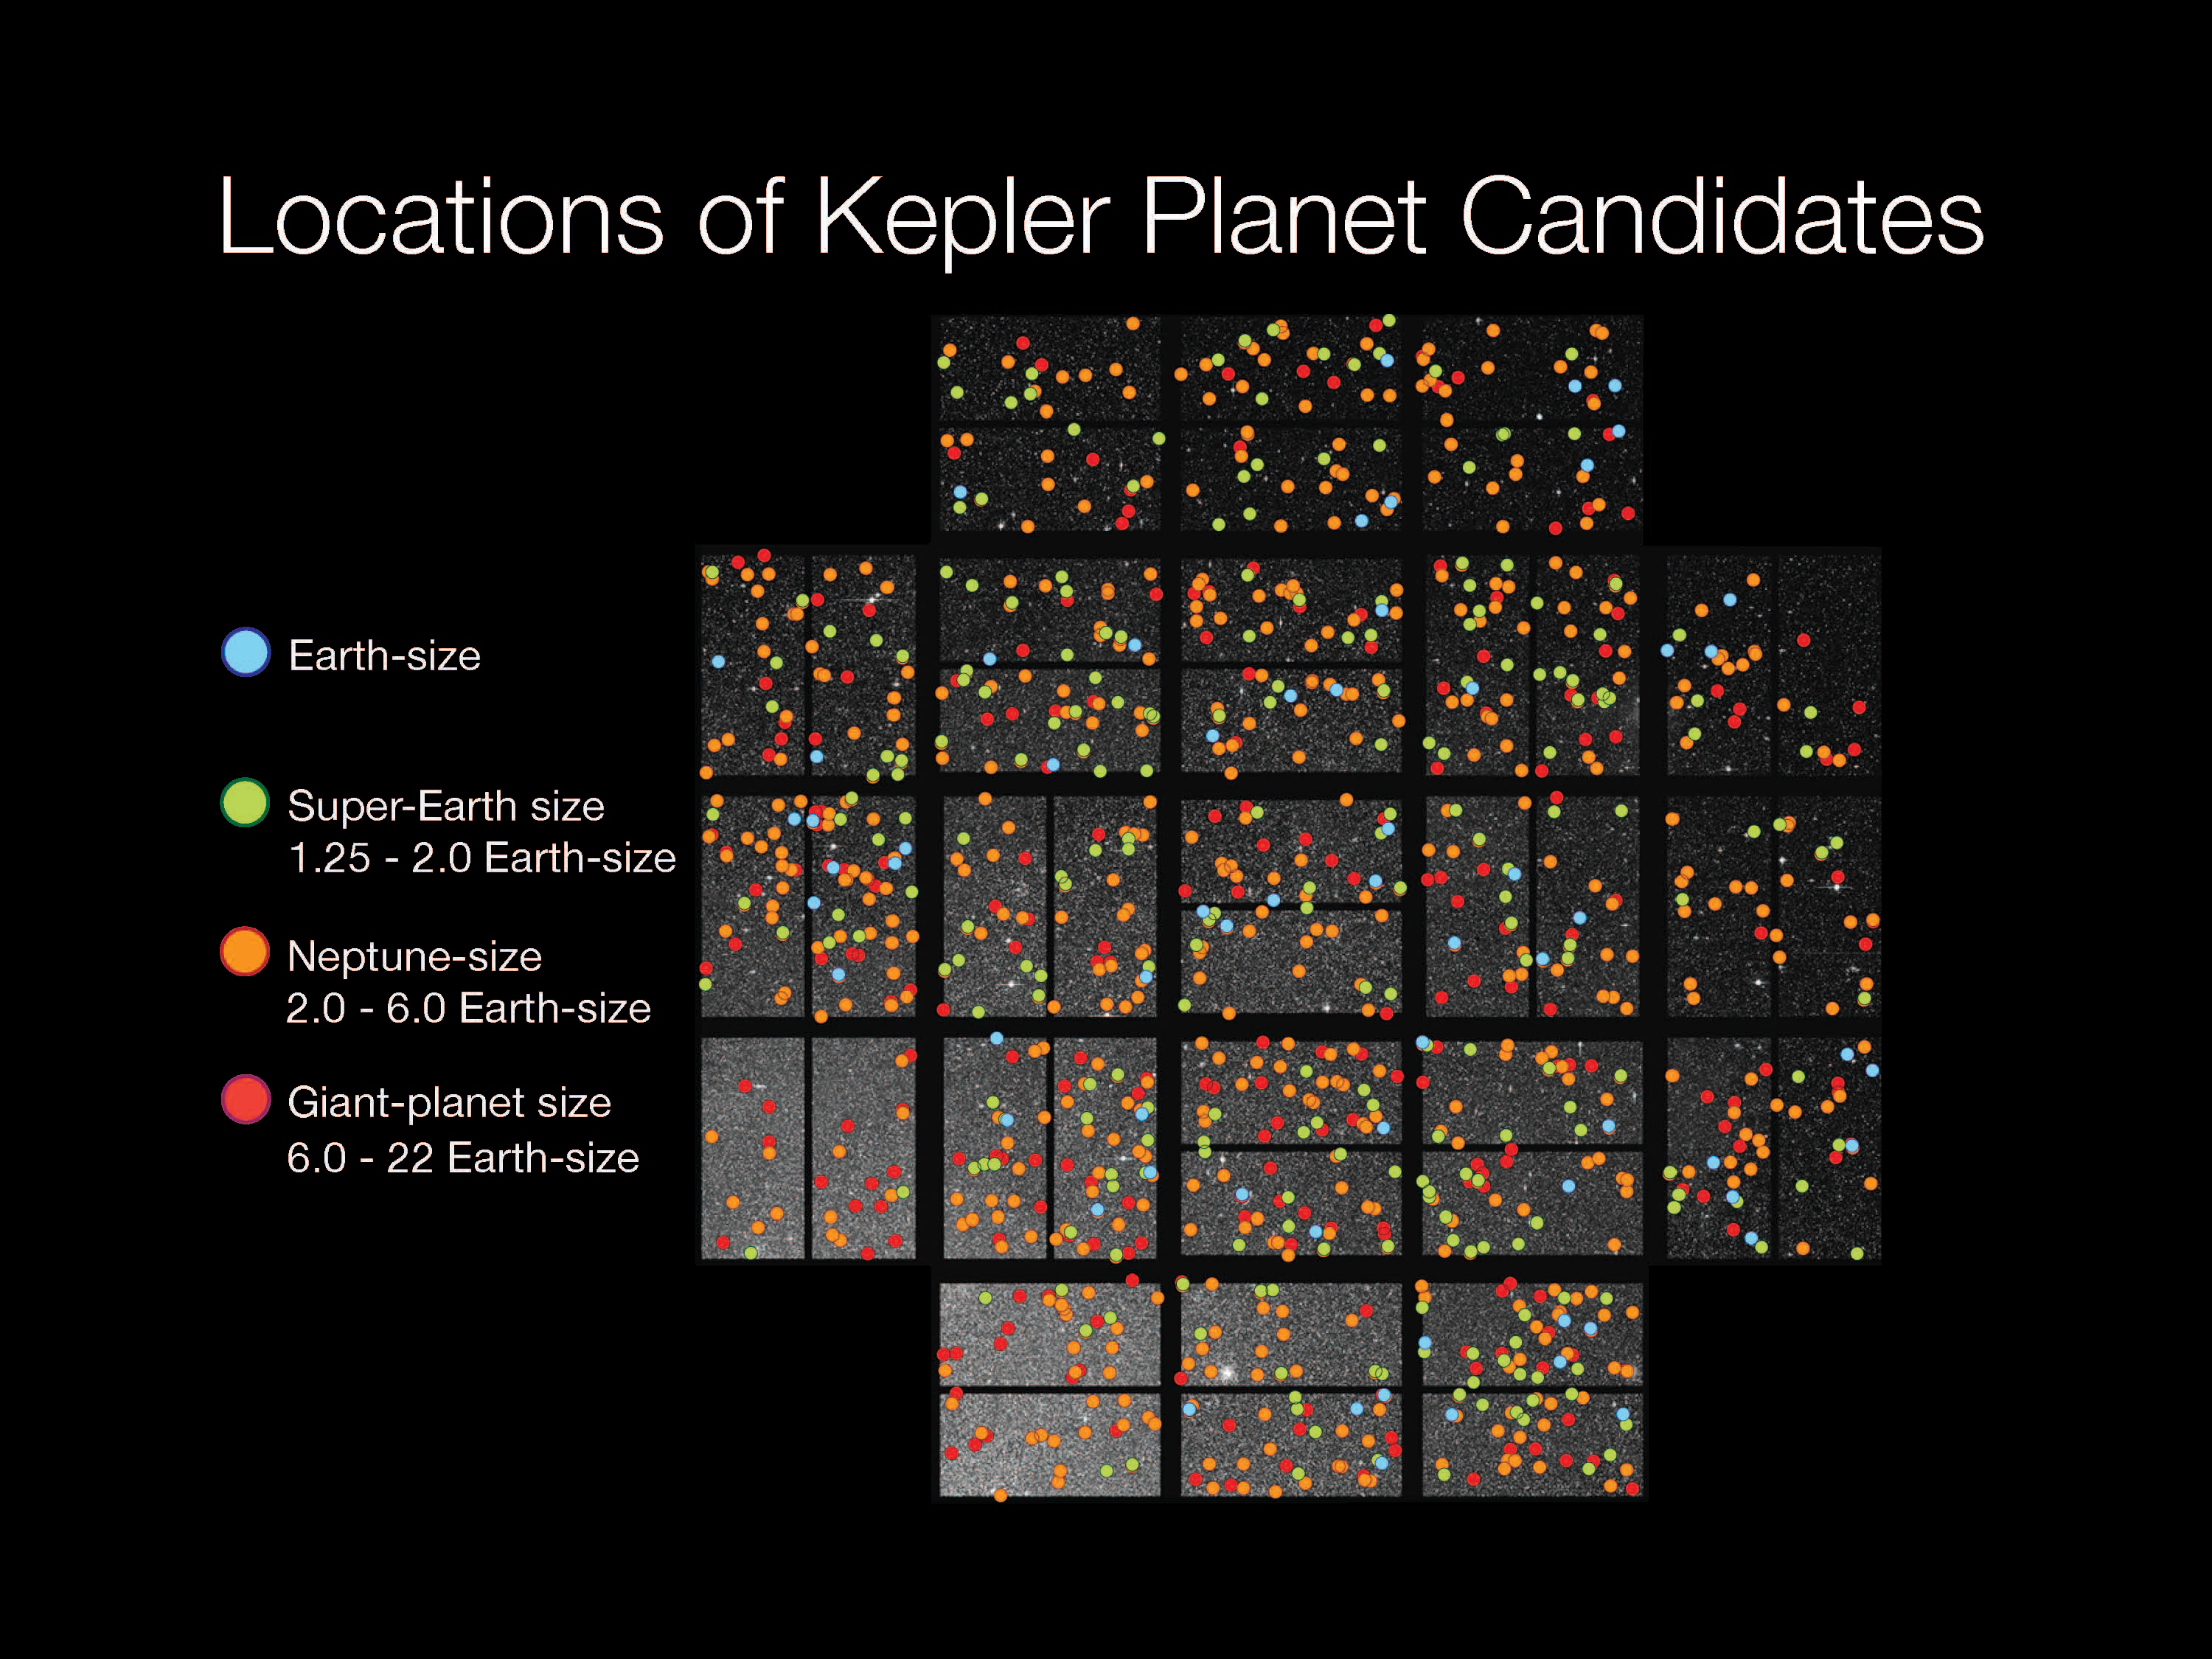 A chart of Kepler planet candidates color coded by size.